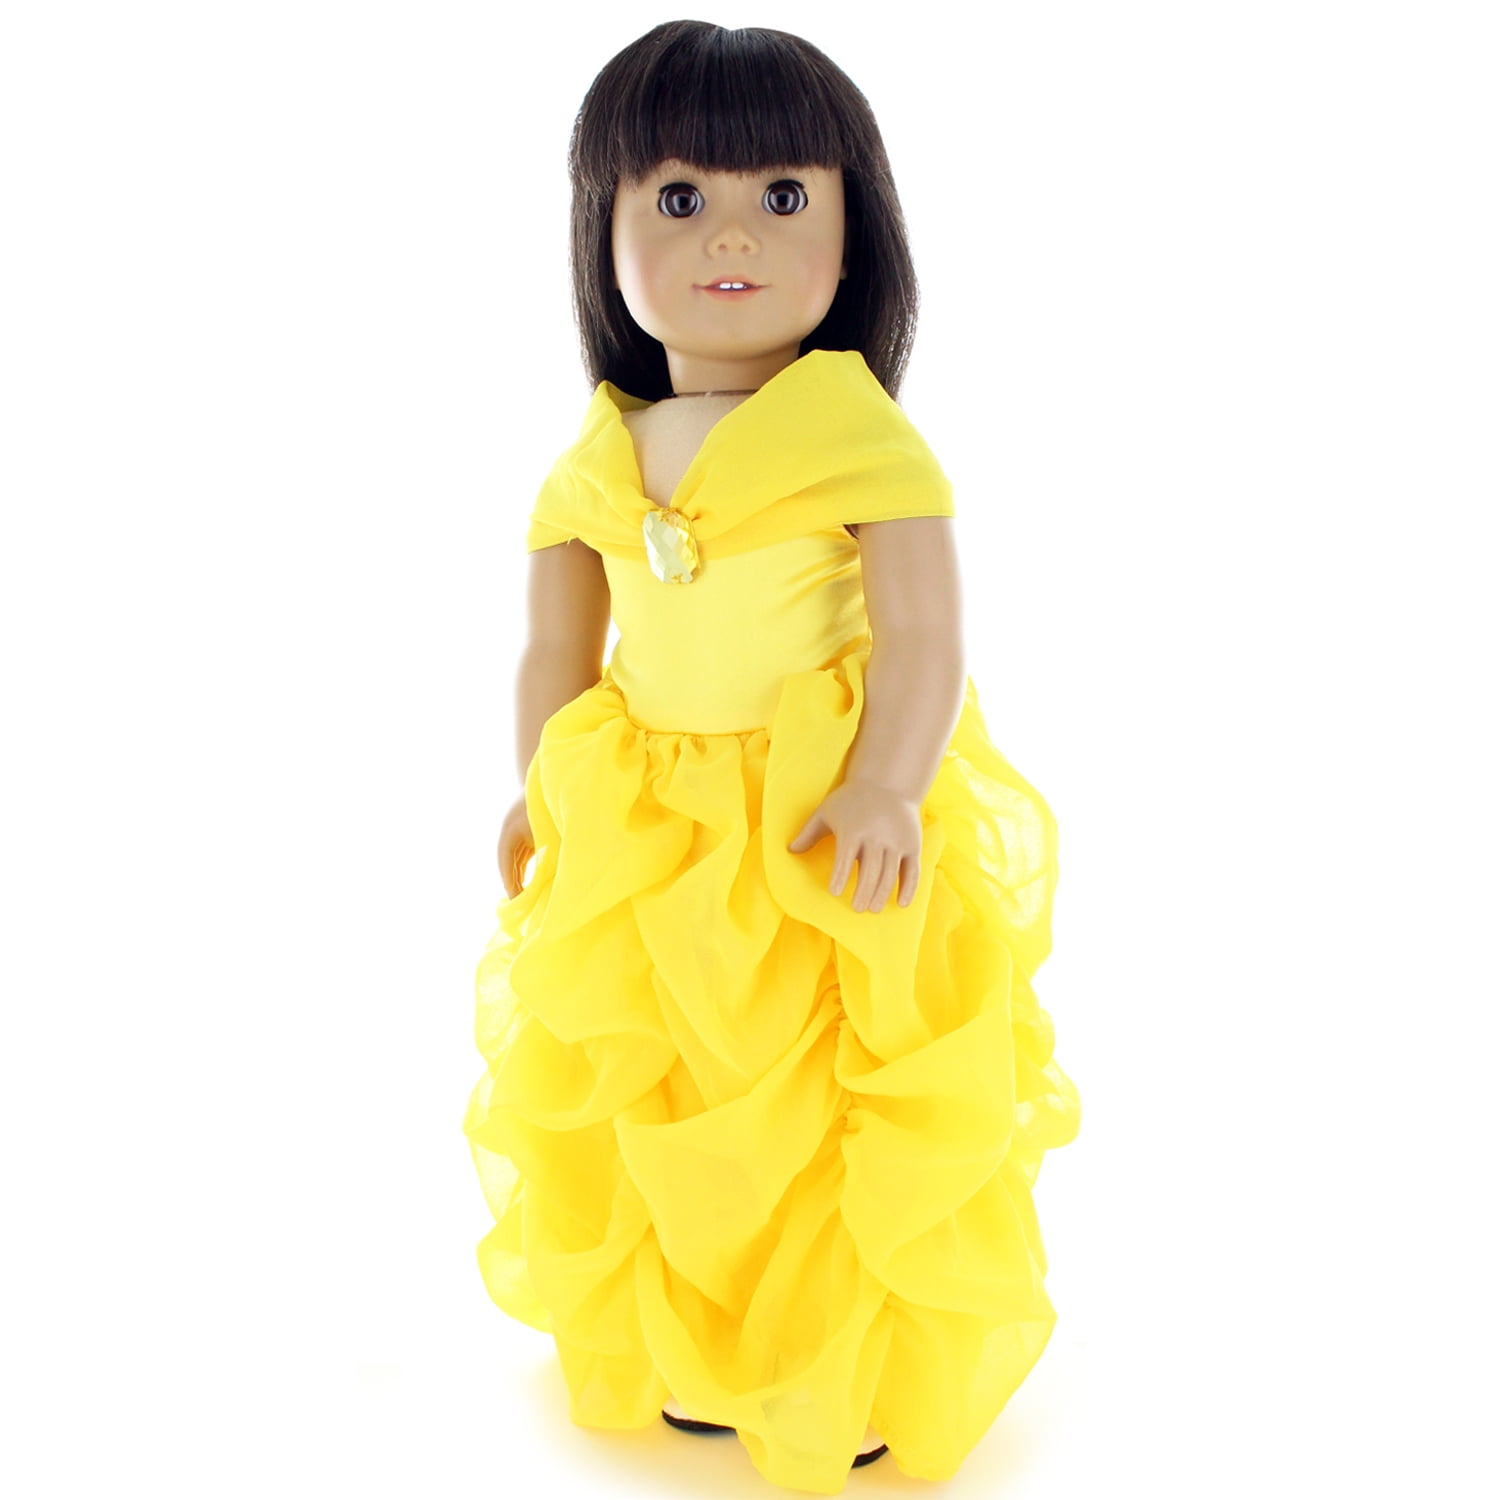 Doll Clothes Yellow Princess Dress Fits American Girl And Other 18 Inch Dolls